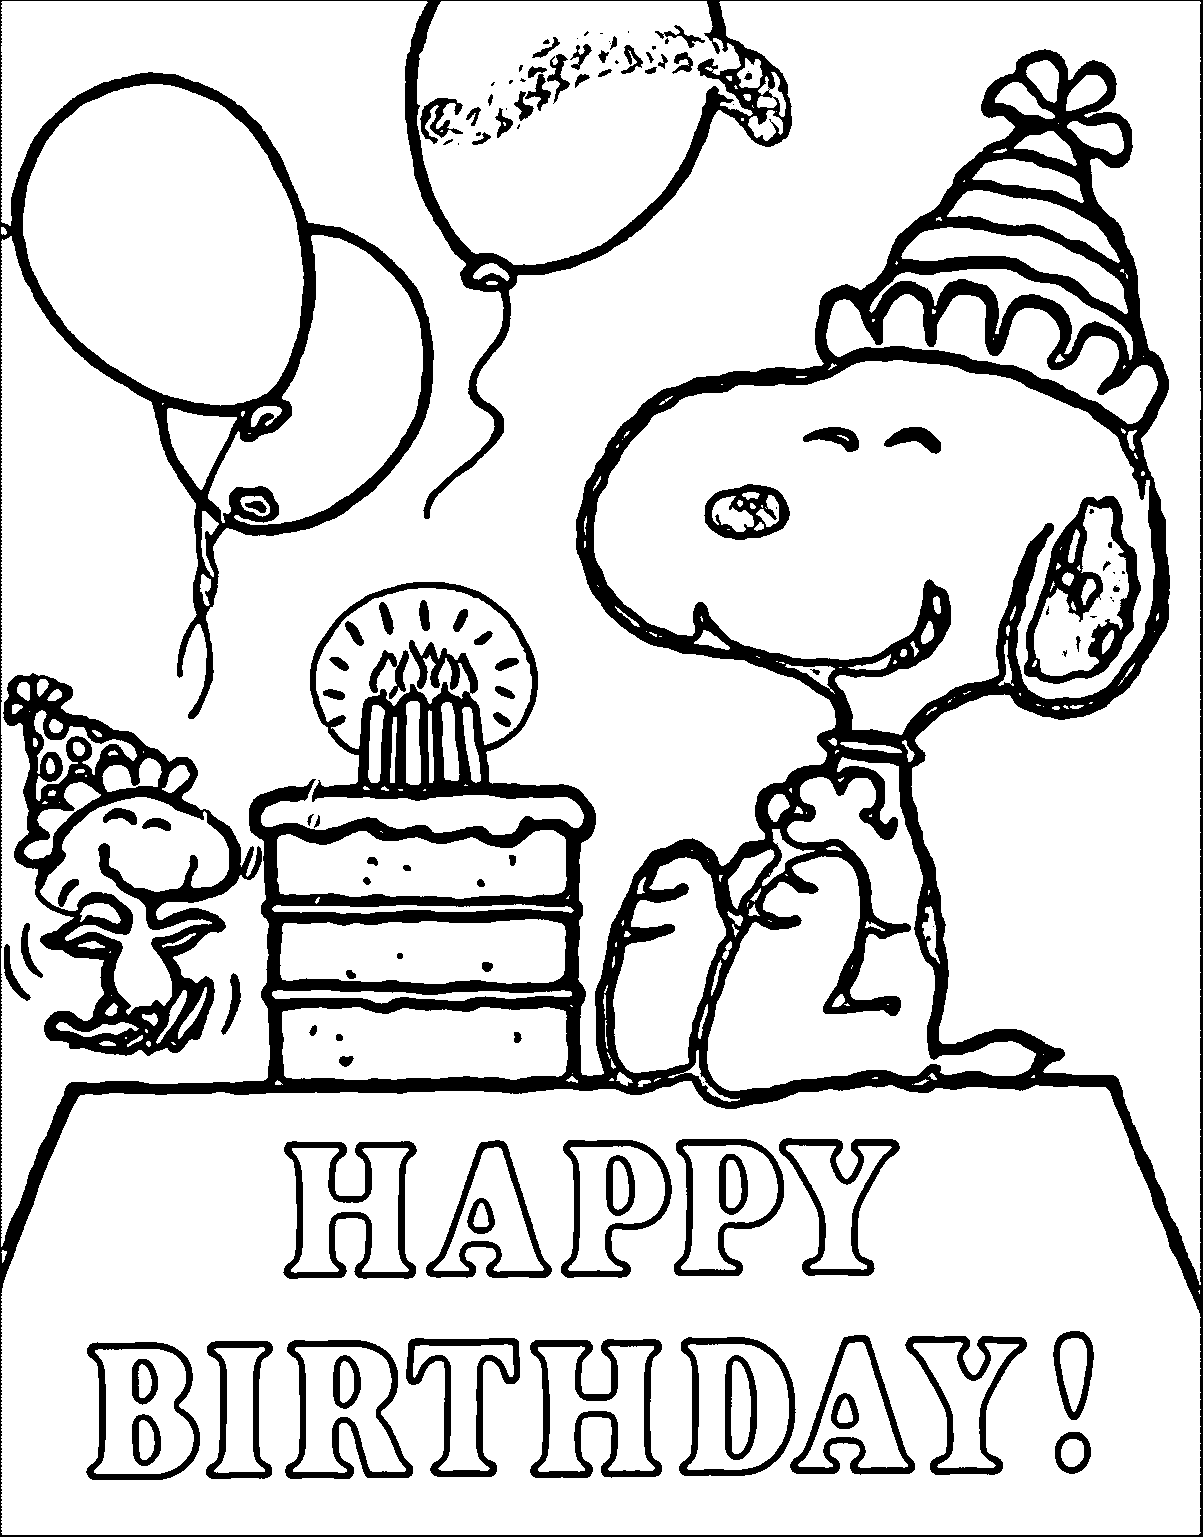 Snoopy and Birthday cake Coloring Page